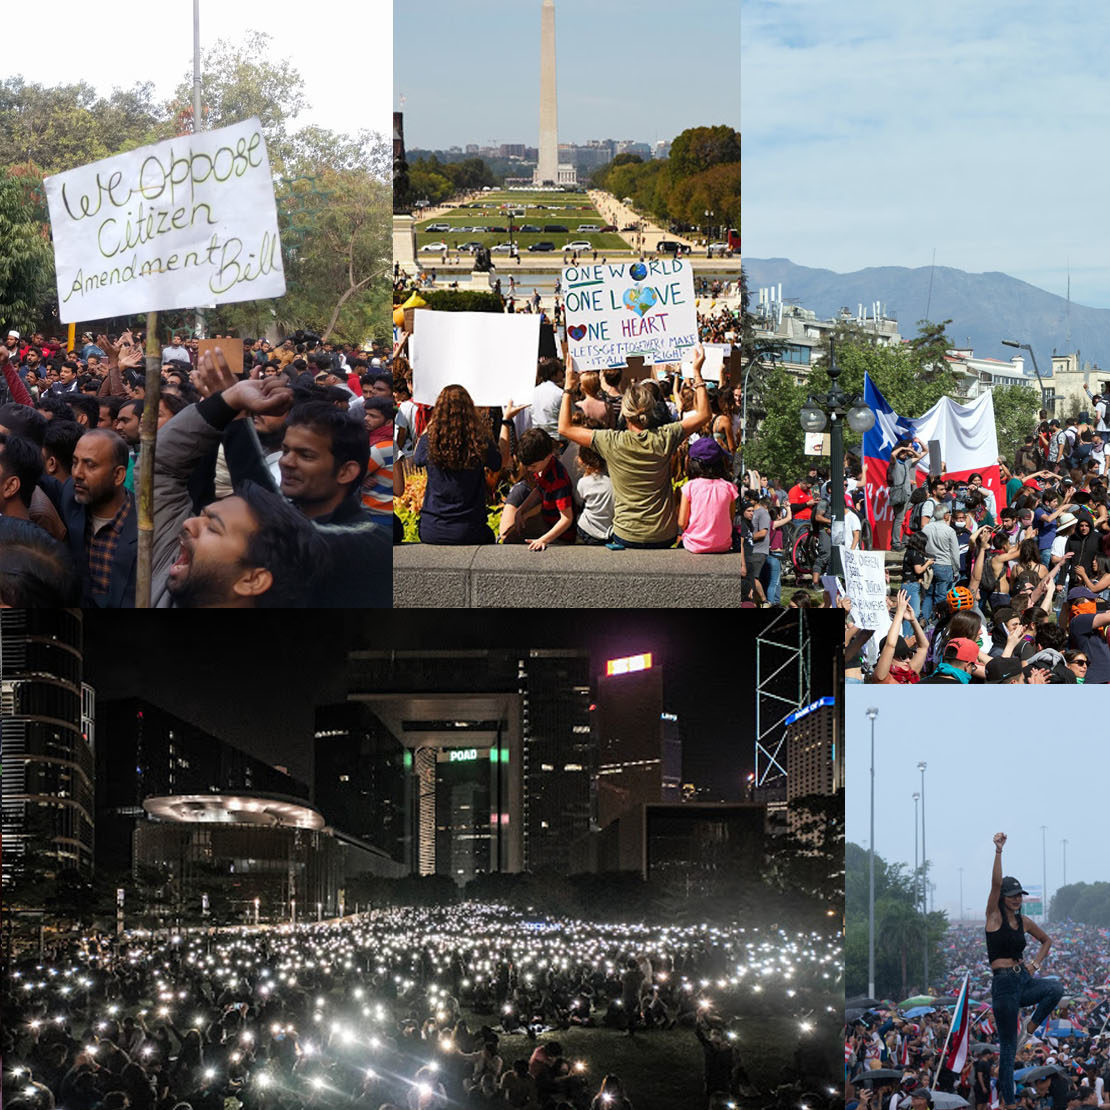 Collage of street protests around the world